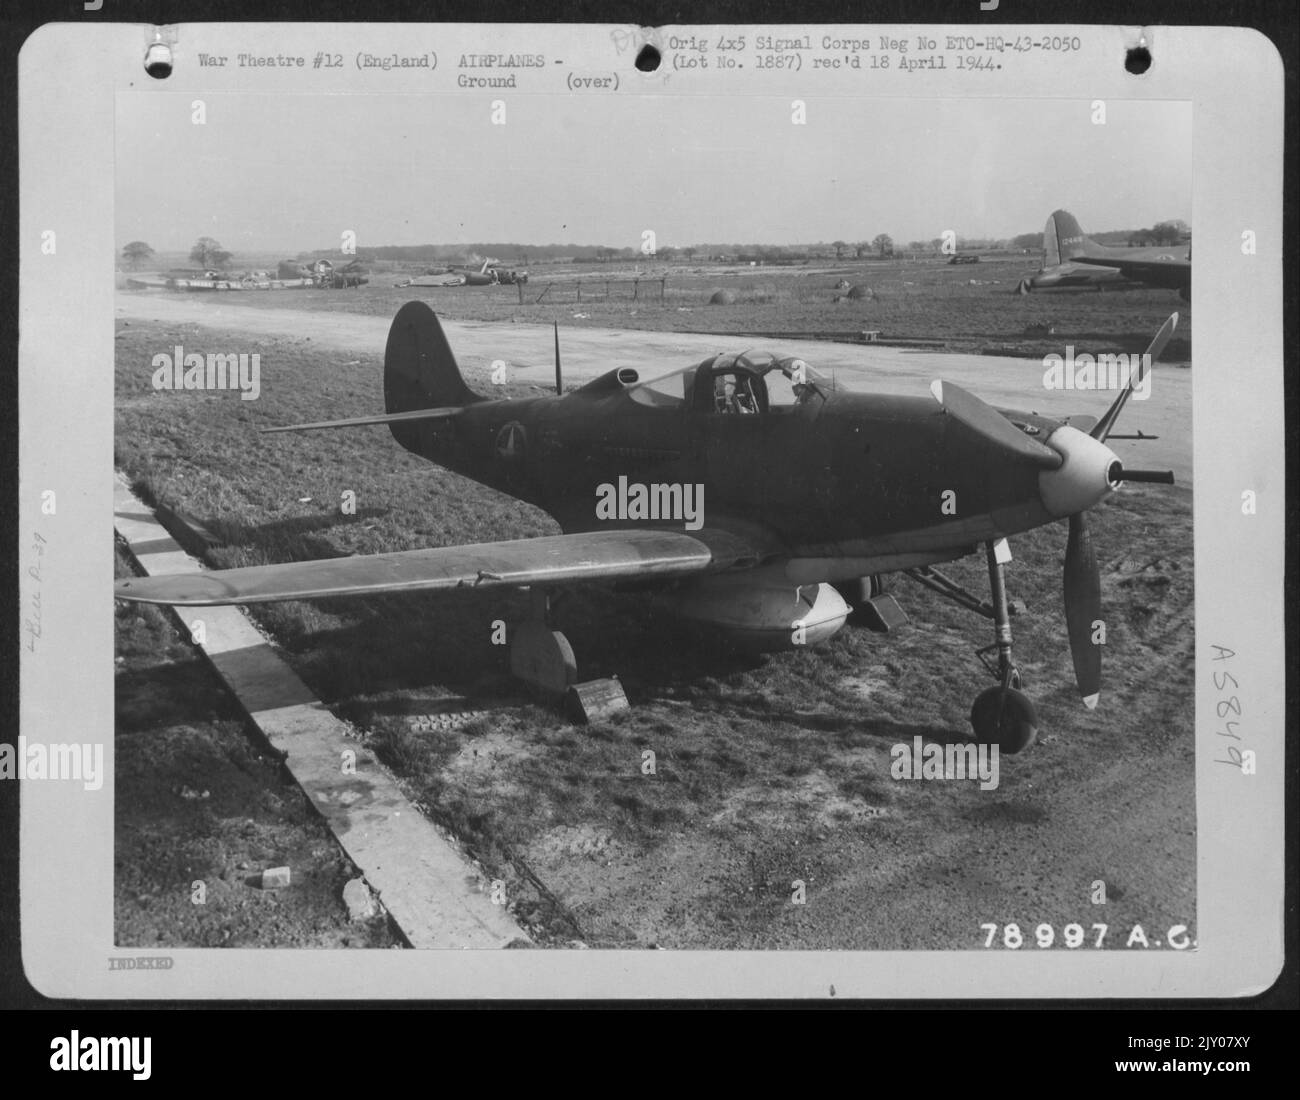 Side View Of A Bell P-39 'Aerocobra' At Burtonwood Airdrome, England. 16 March 1943. Stock Photo